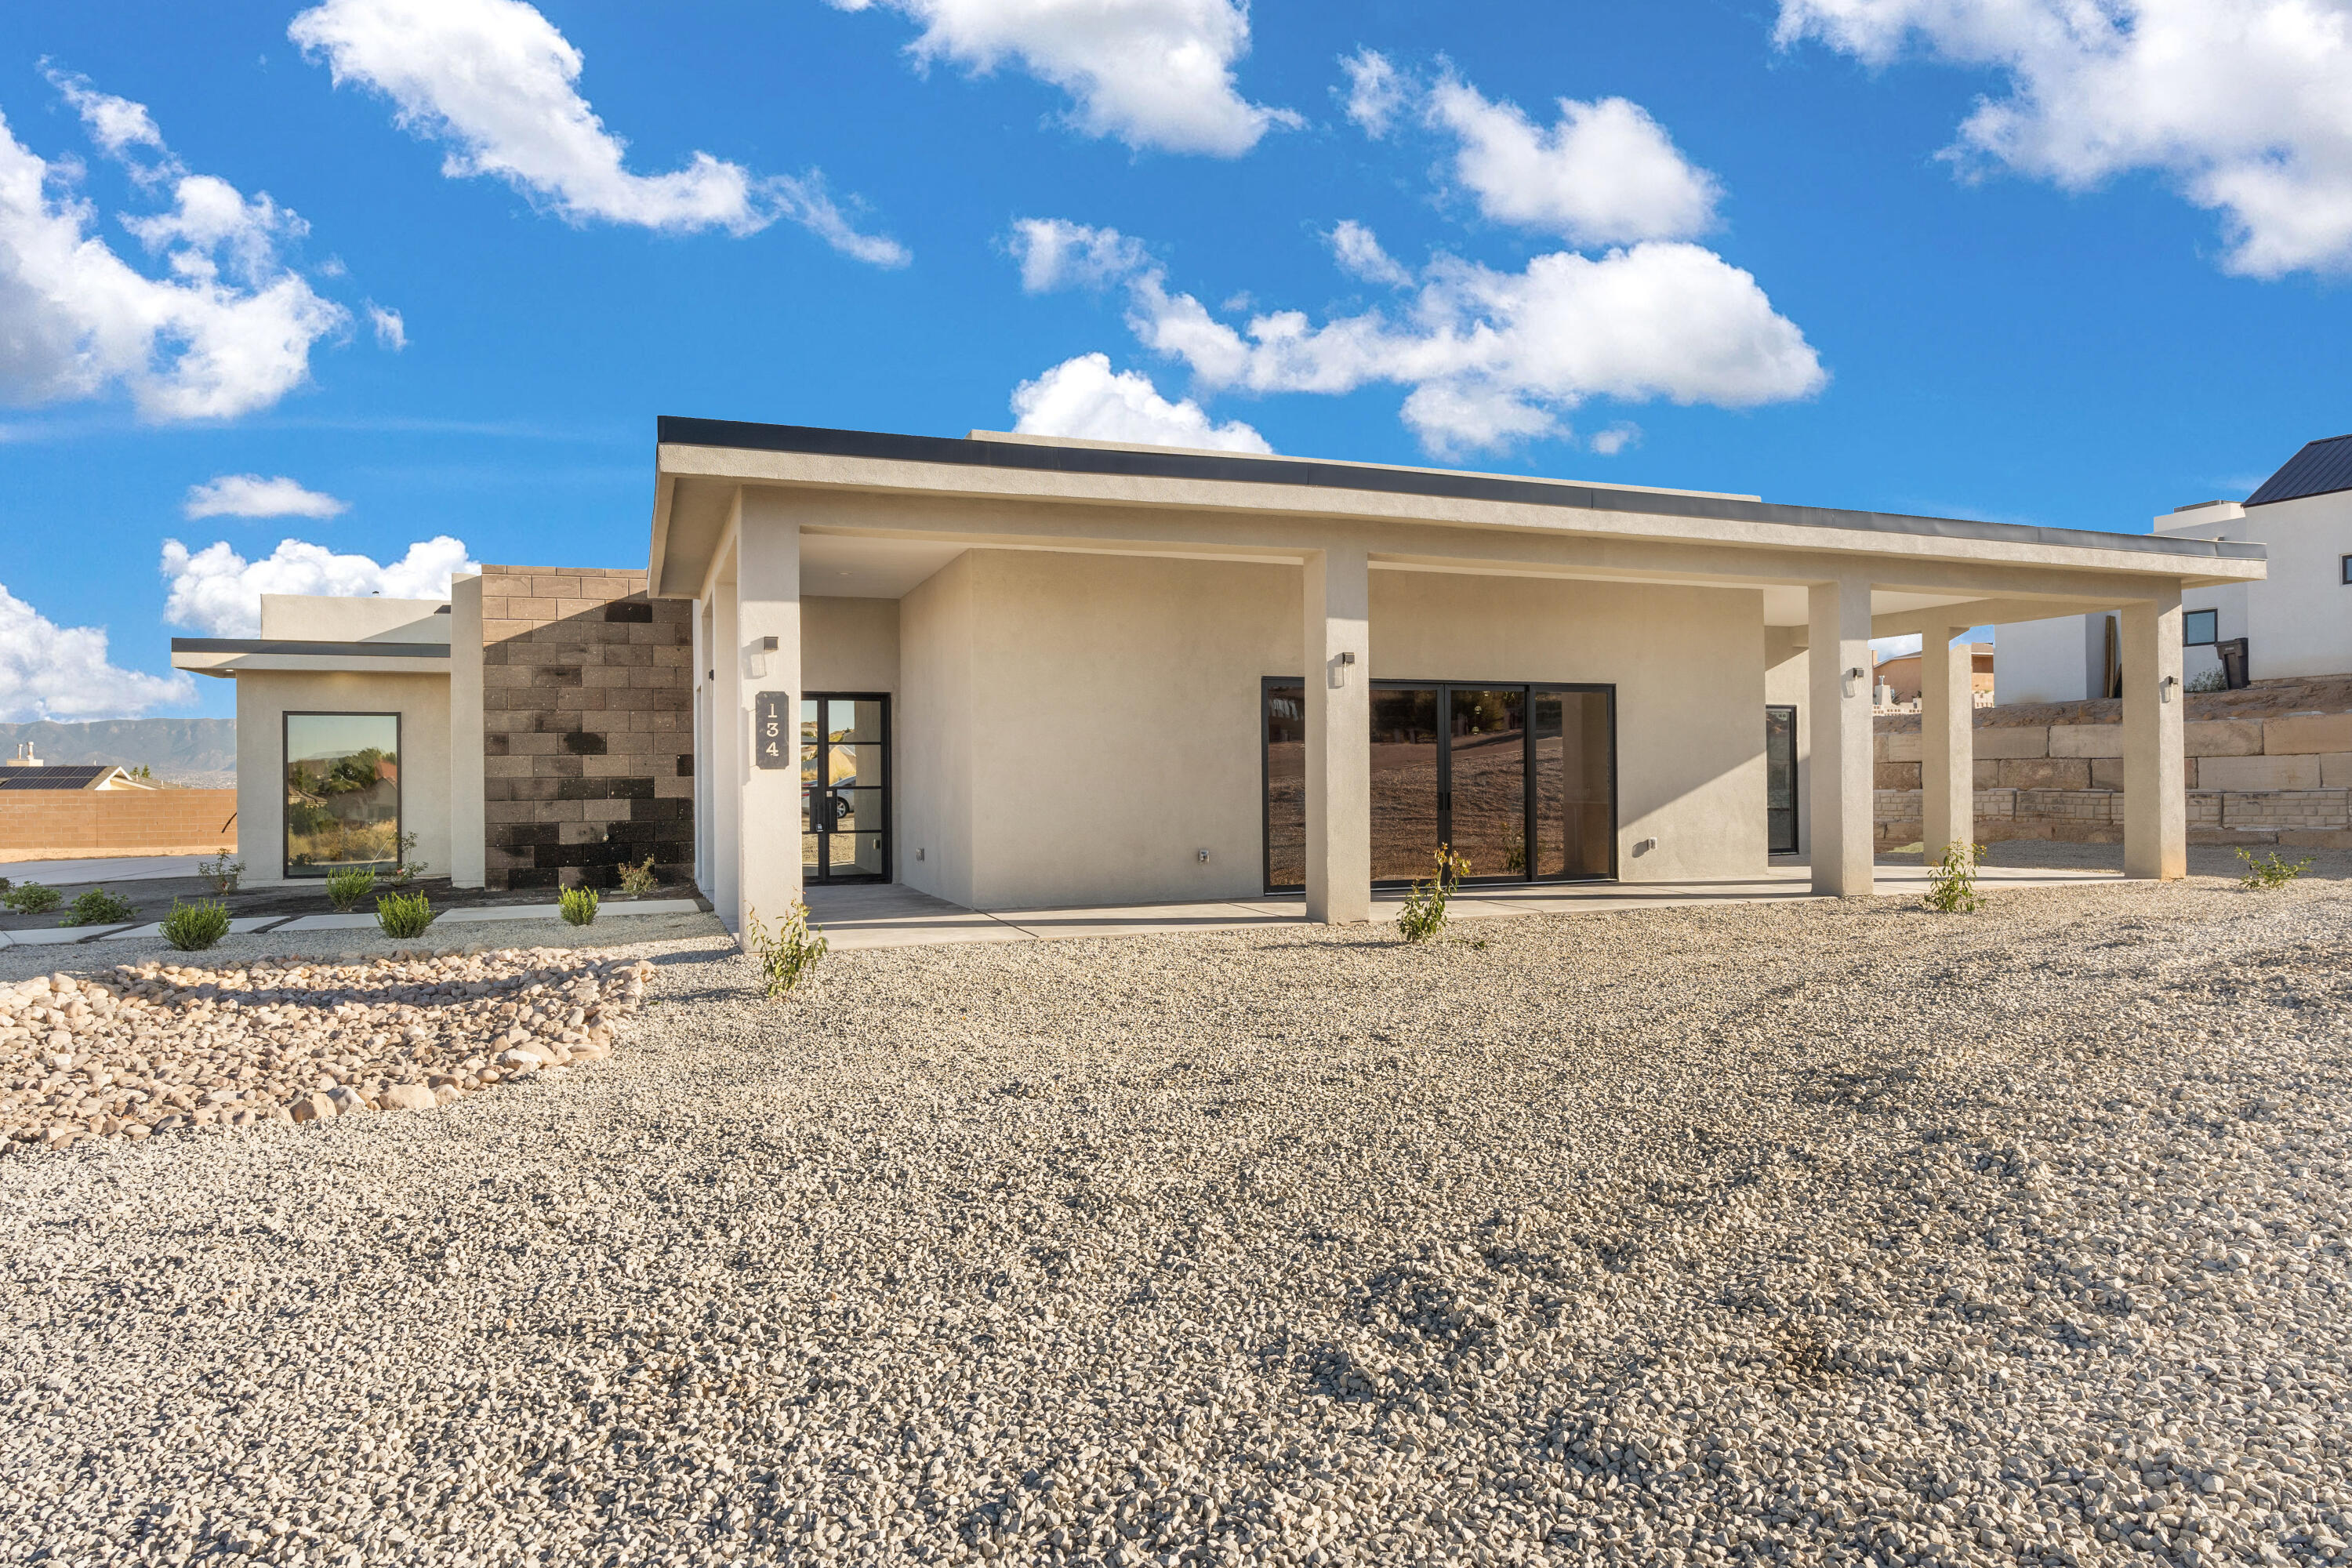 This Custom Contemporary Home is brought to you by First Impression Builders! Sitting on a half acre in a centralized Rio Rancho, this one is upgrade rich! Simple landscaping with backyard access, 3-car epoxied garage & roof top deck with untouchable views! Metal French doors leads you into this modernly-styled dreamy home w/ 12-foot ceilings in the living room and kitchen and your own boujee bar. Sleek tile flooring throughout helps create seamless vibe. Fall in love with the Primary Suite showcasing a walk out covered patio & en-suite loaded with ritzy upgrades such as black freestanding tub, walk in shower, double vanities, dual-closets..the list does on. Natural light floods the home with the extra large windows, sliding doors, and skylights. The eclectic gourmet kitchen touts solid